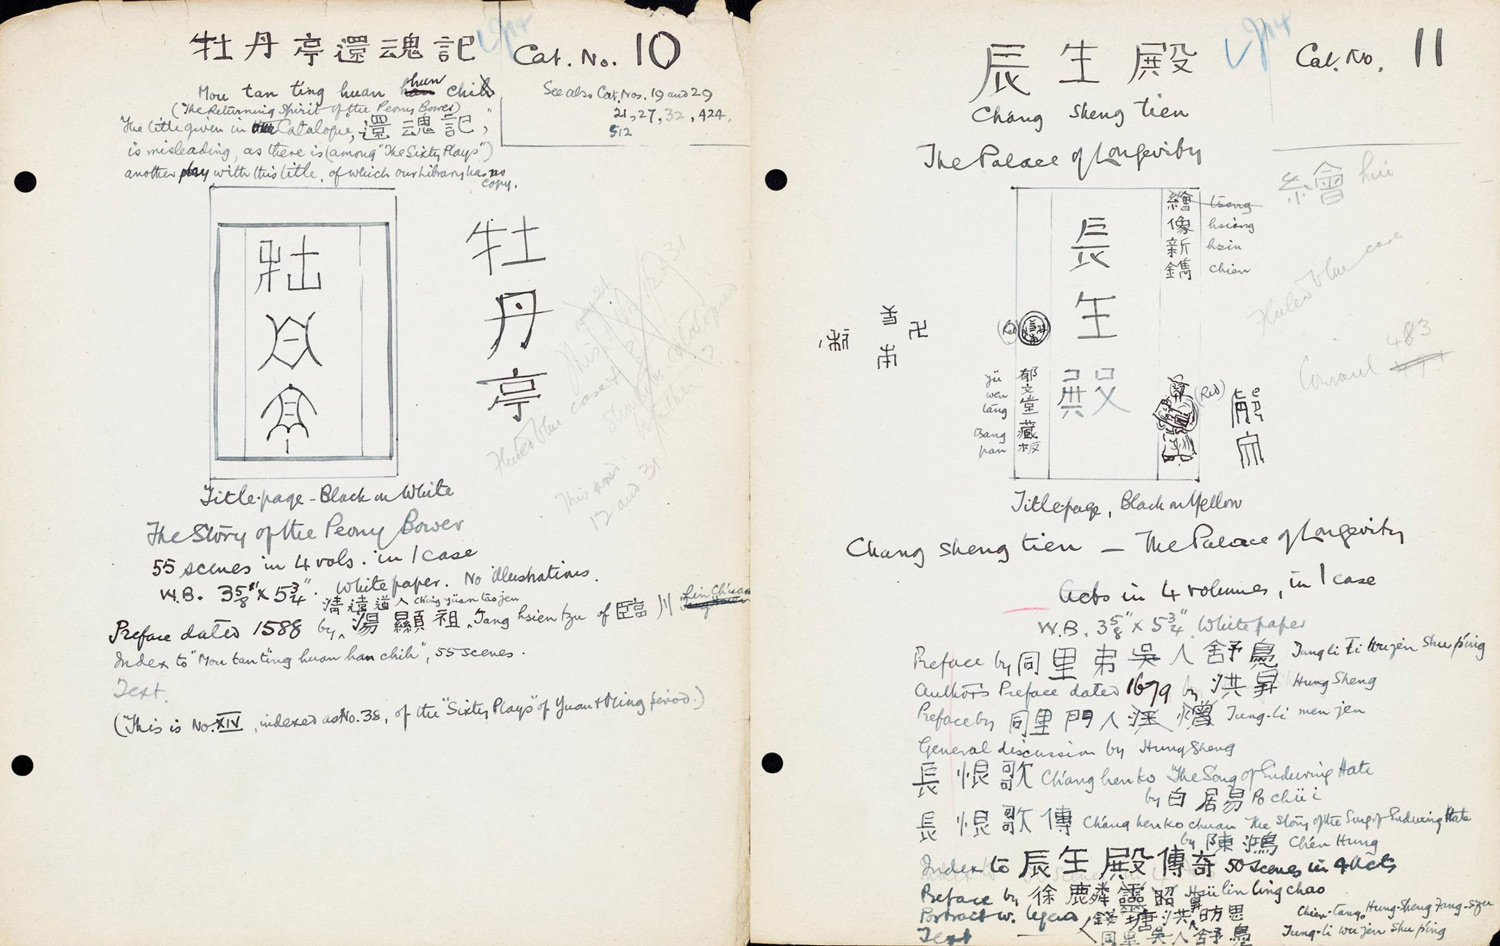 Thomas Manning’s notes on “The Peony Pavilion” and “The Palace of Longevity,” from the Chinese Collection of the RAS Library. From Royal Asiatic Society